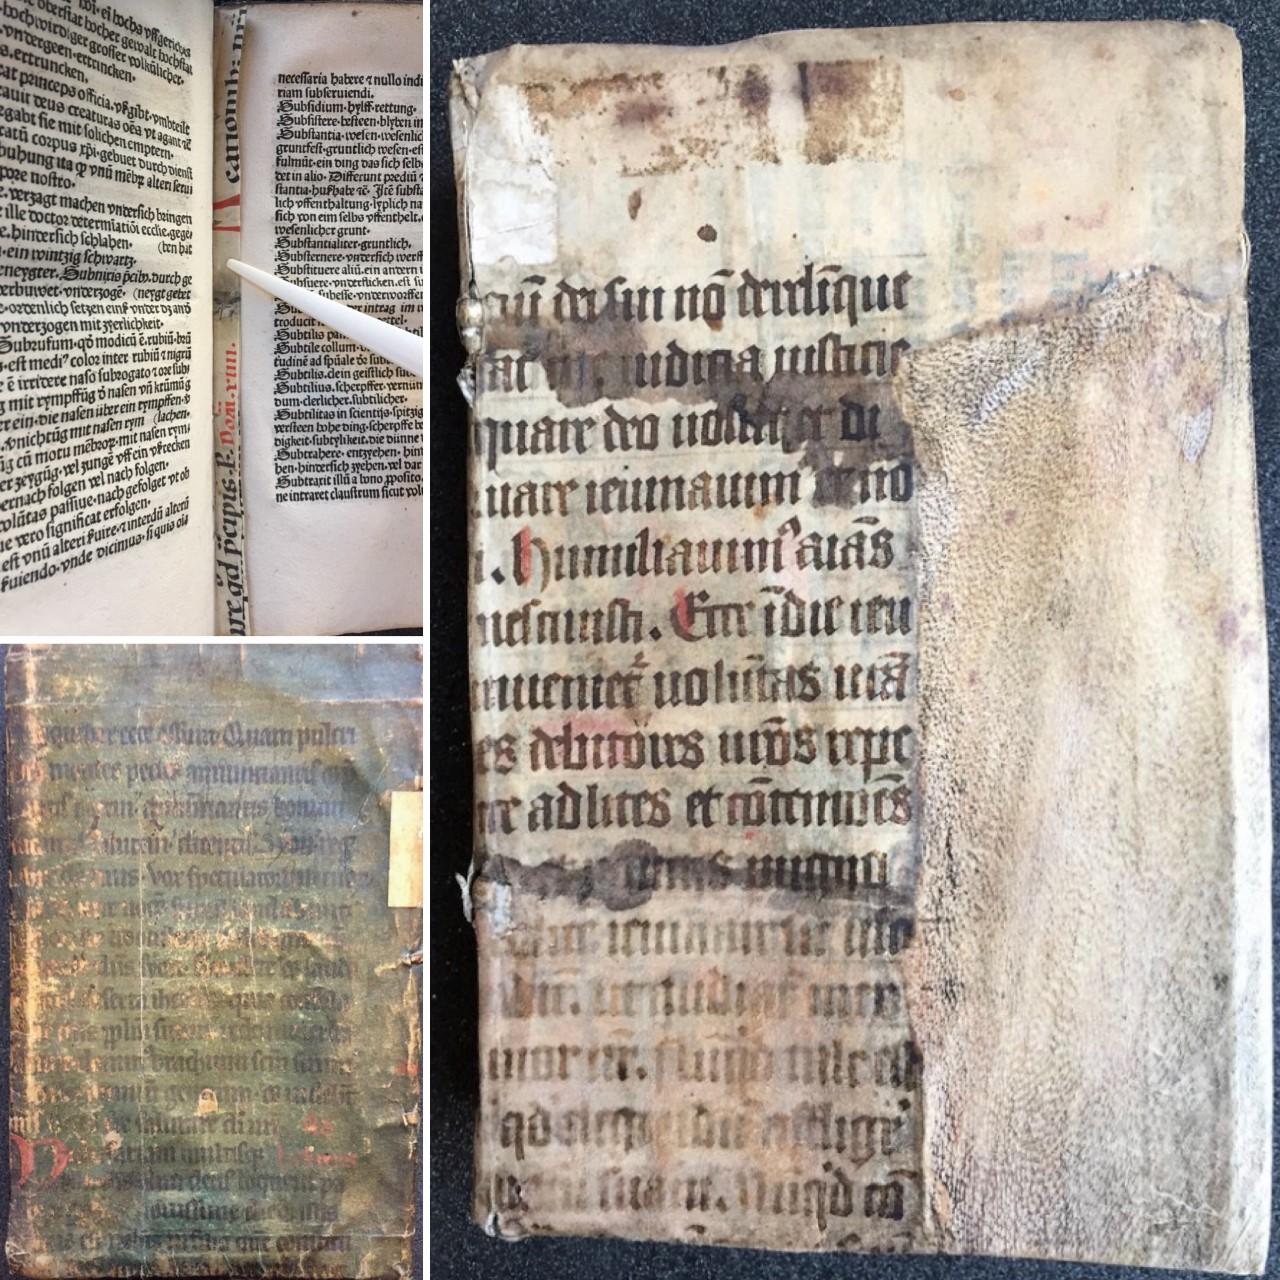 Three images of manuscript fragments used to bind books or to reinforce weak areas.